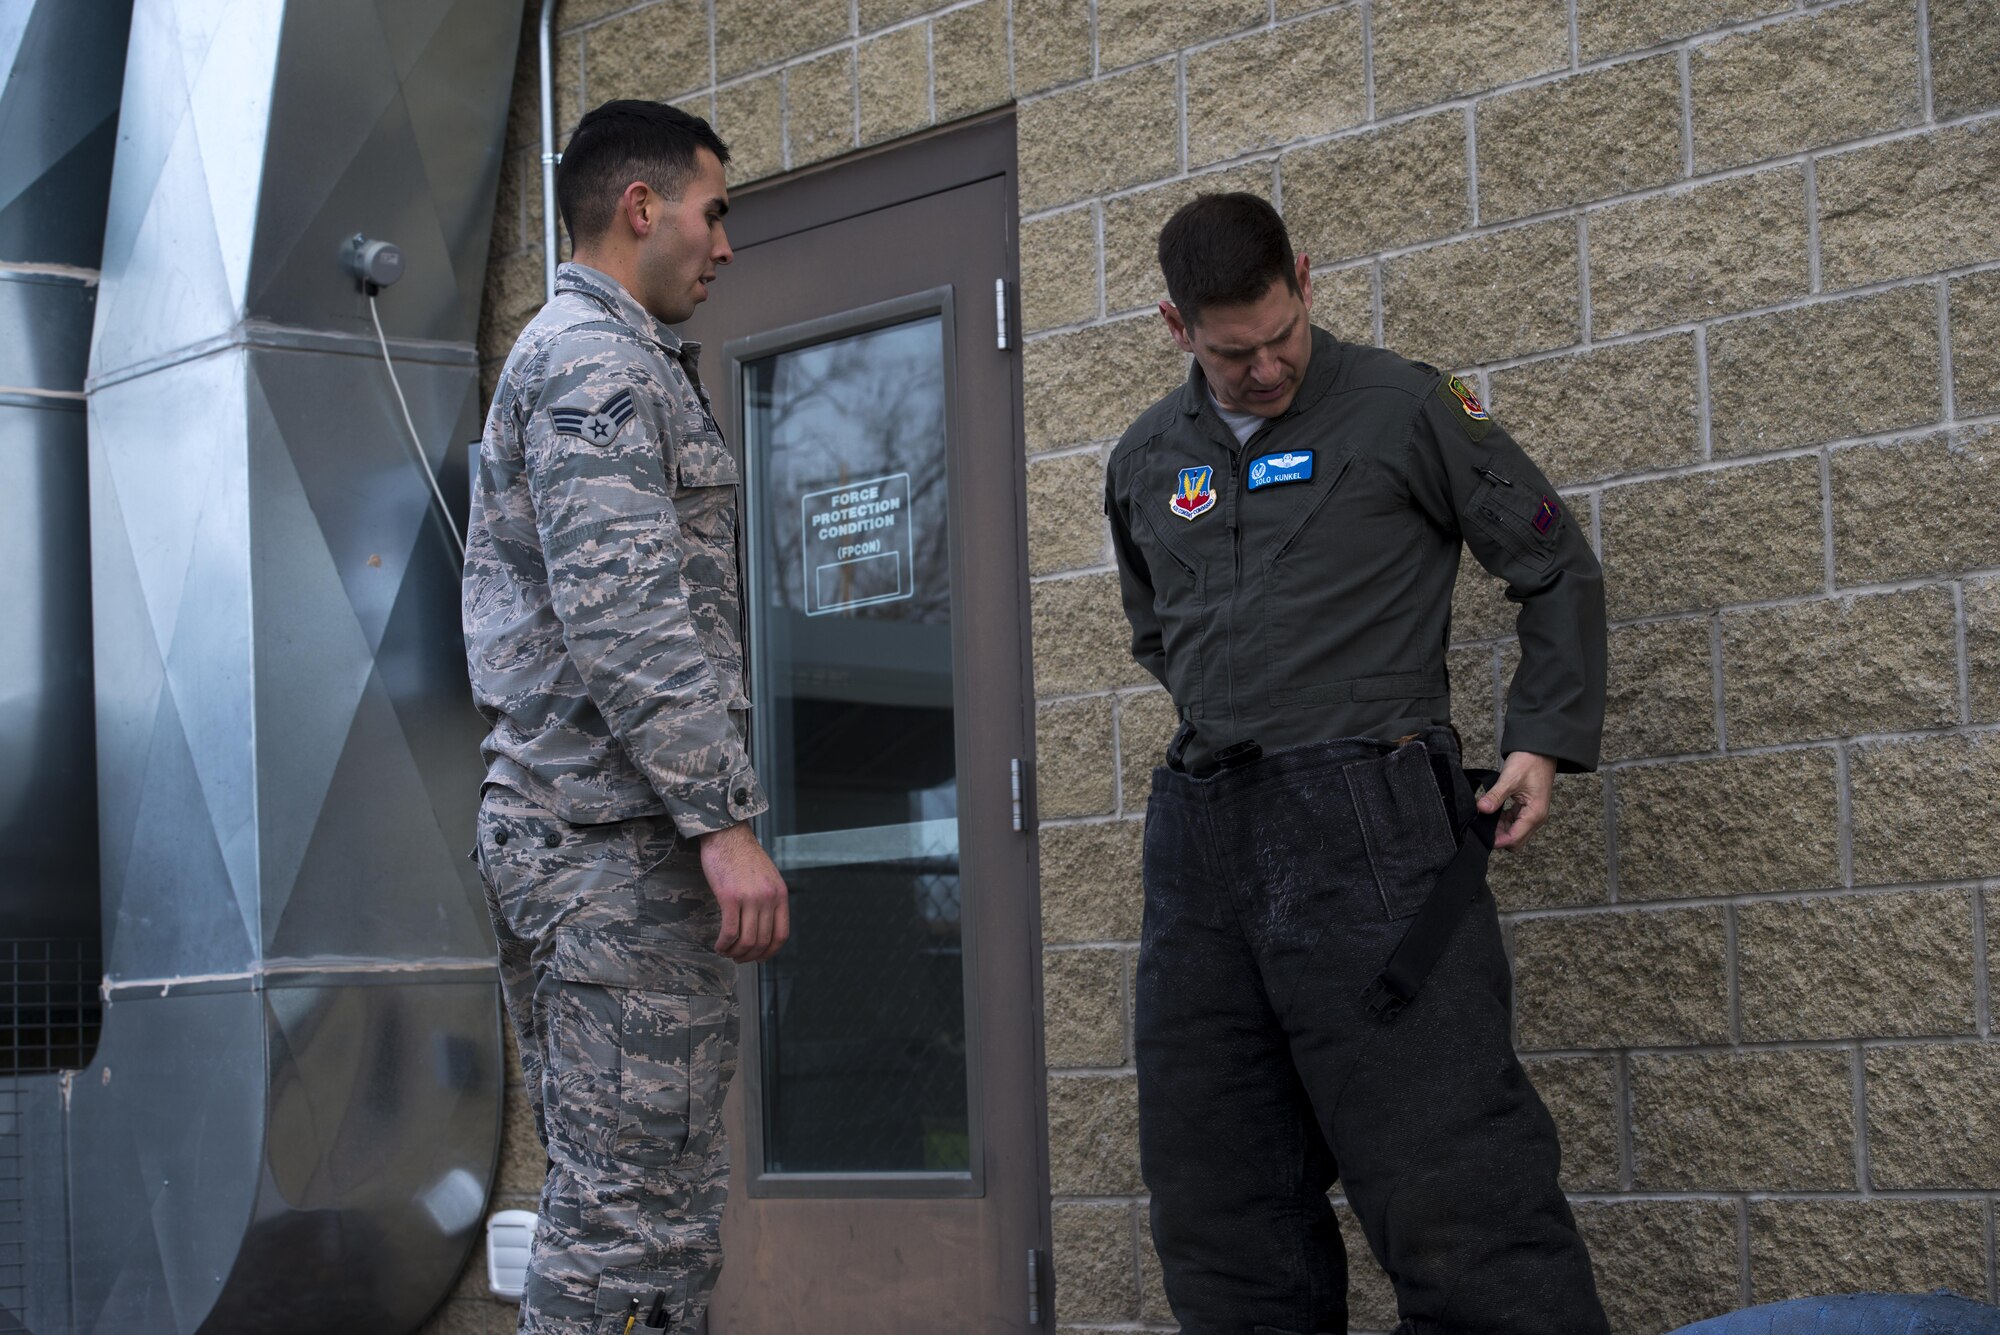 Senior Airman Kyle Maddox, 366th Security Forces Squadron military working dog trainer, instructs Col. Joeseph Kunkel, 366th Fighter Wing commander, on how to put on a bite suit Nov. 29, 2017, at Mountain Home Air Force Base, Idaho. The MWD obedience course is designed to place military working dogs in a basic setting to encounter obstacles they may face in real world situations.